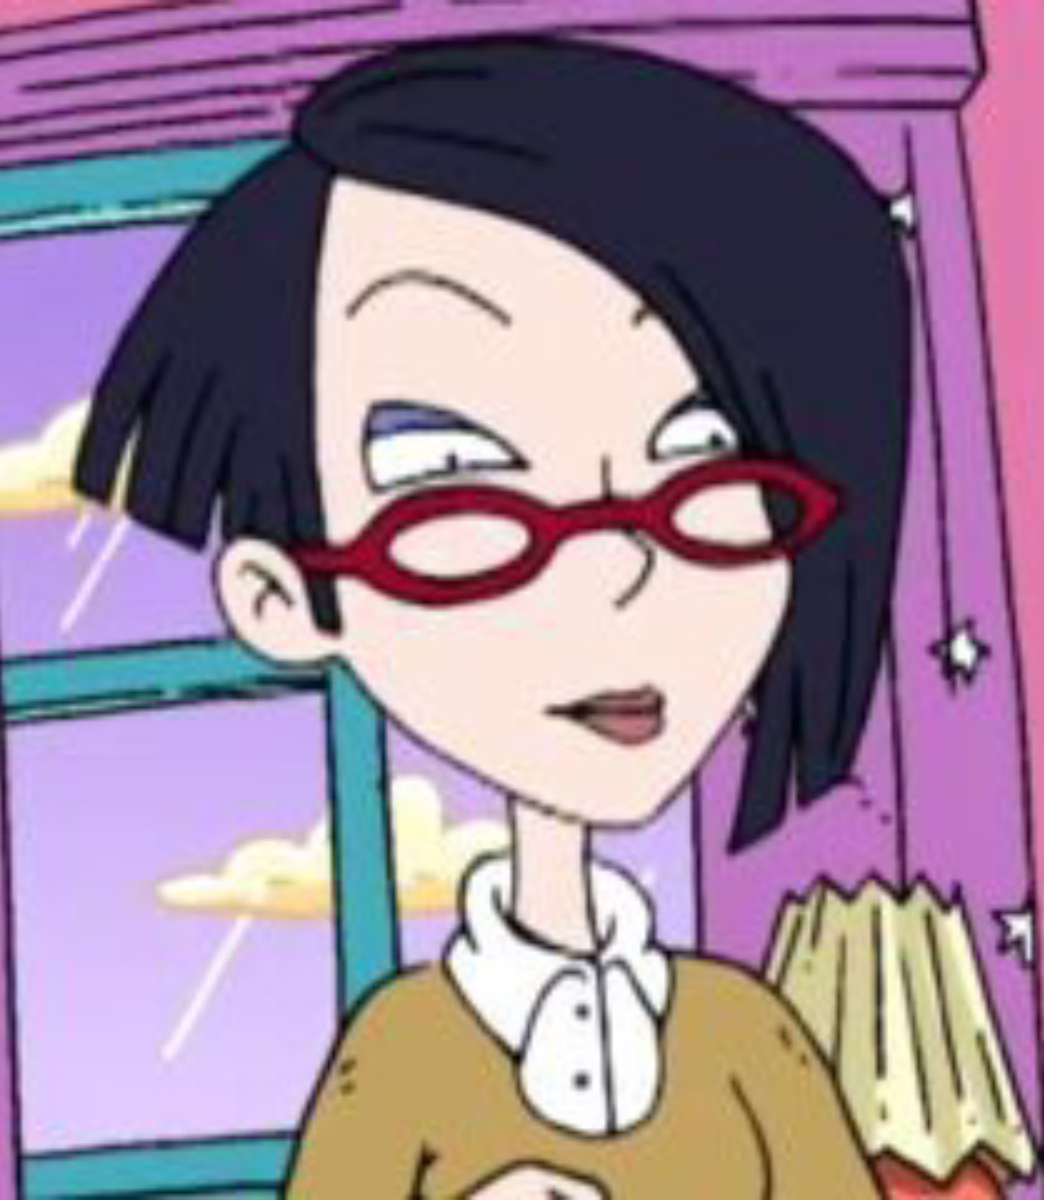 Kira Watanabe-Finster❤️❤️❤️❤️❤️❤️ online puzzle